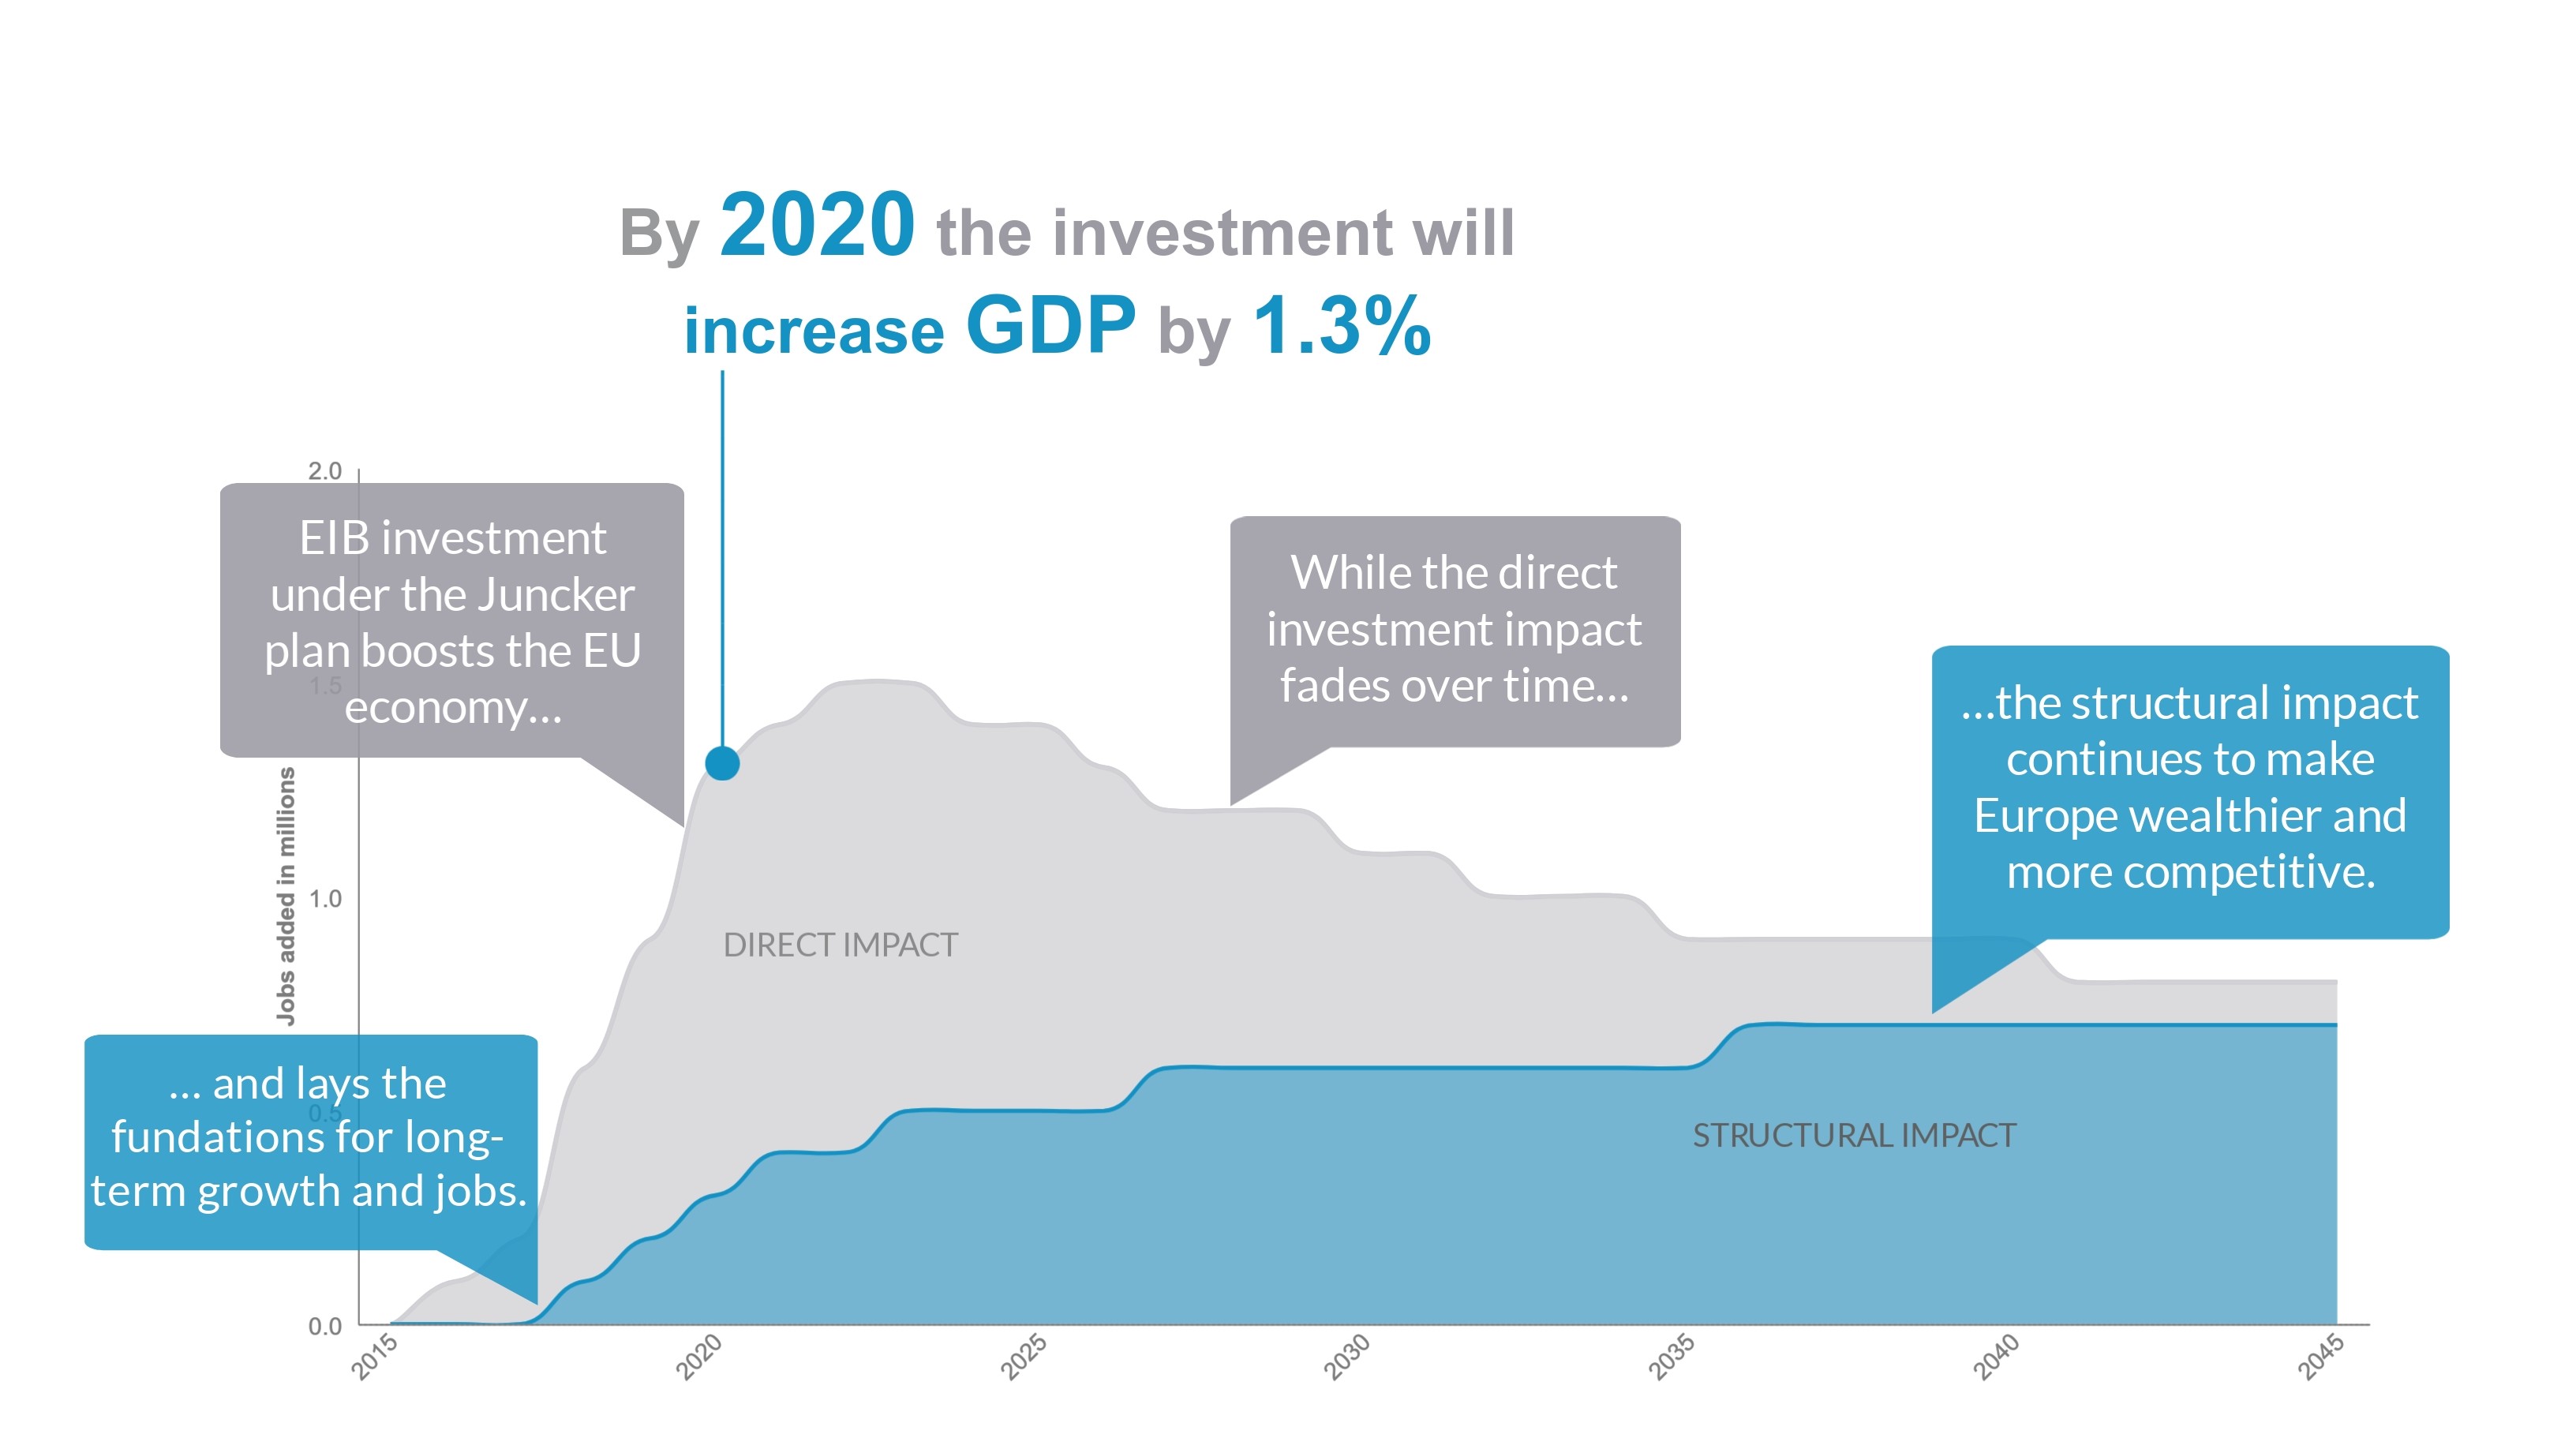 By 2020 the investment will increase GDP by 1.3%